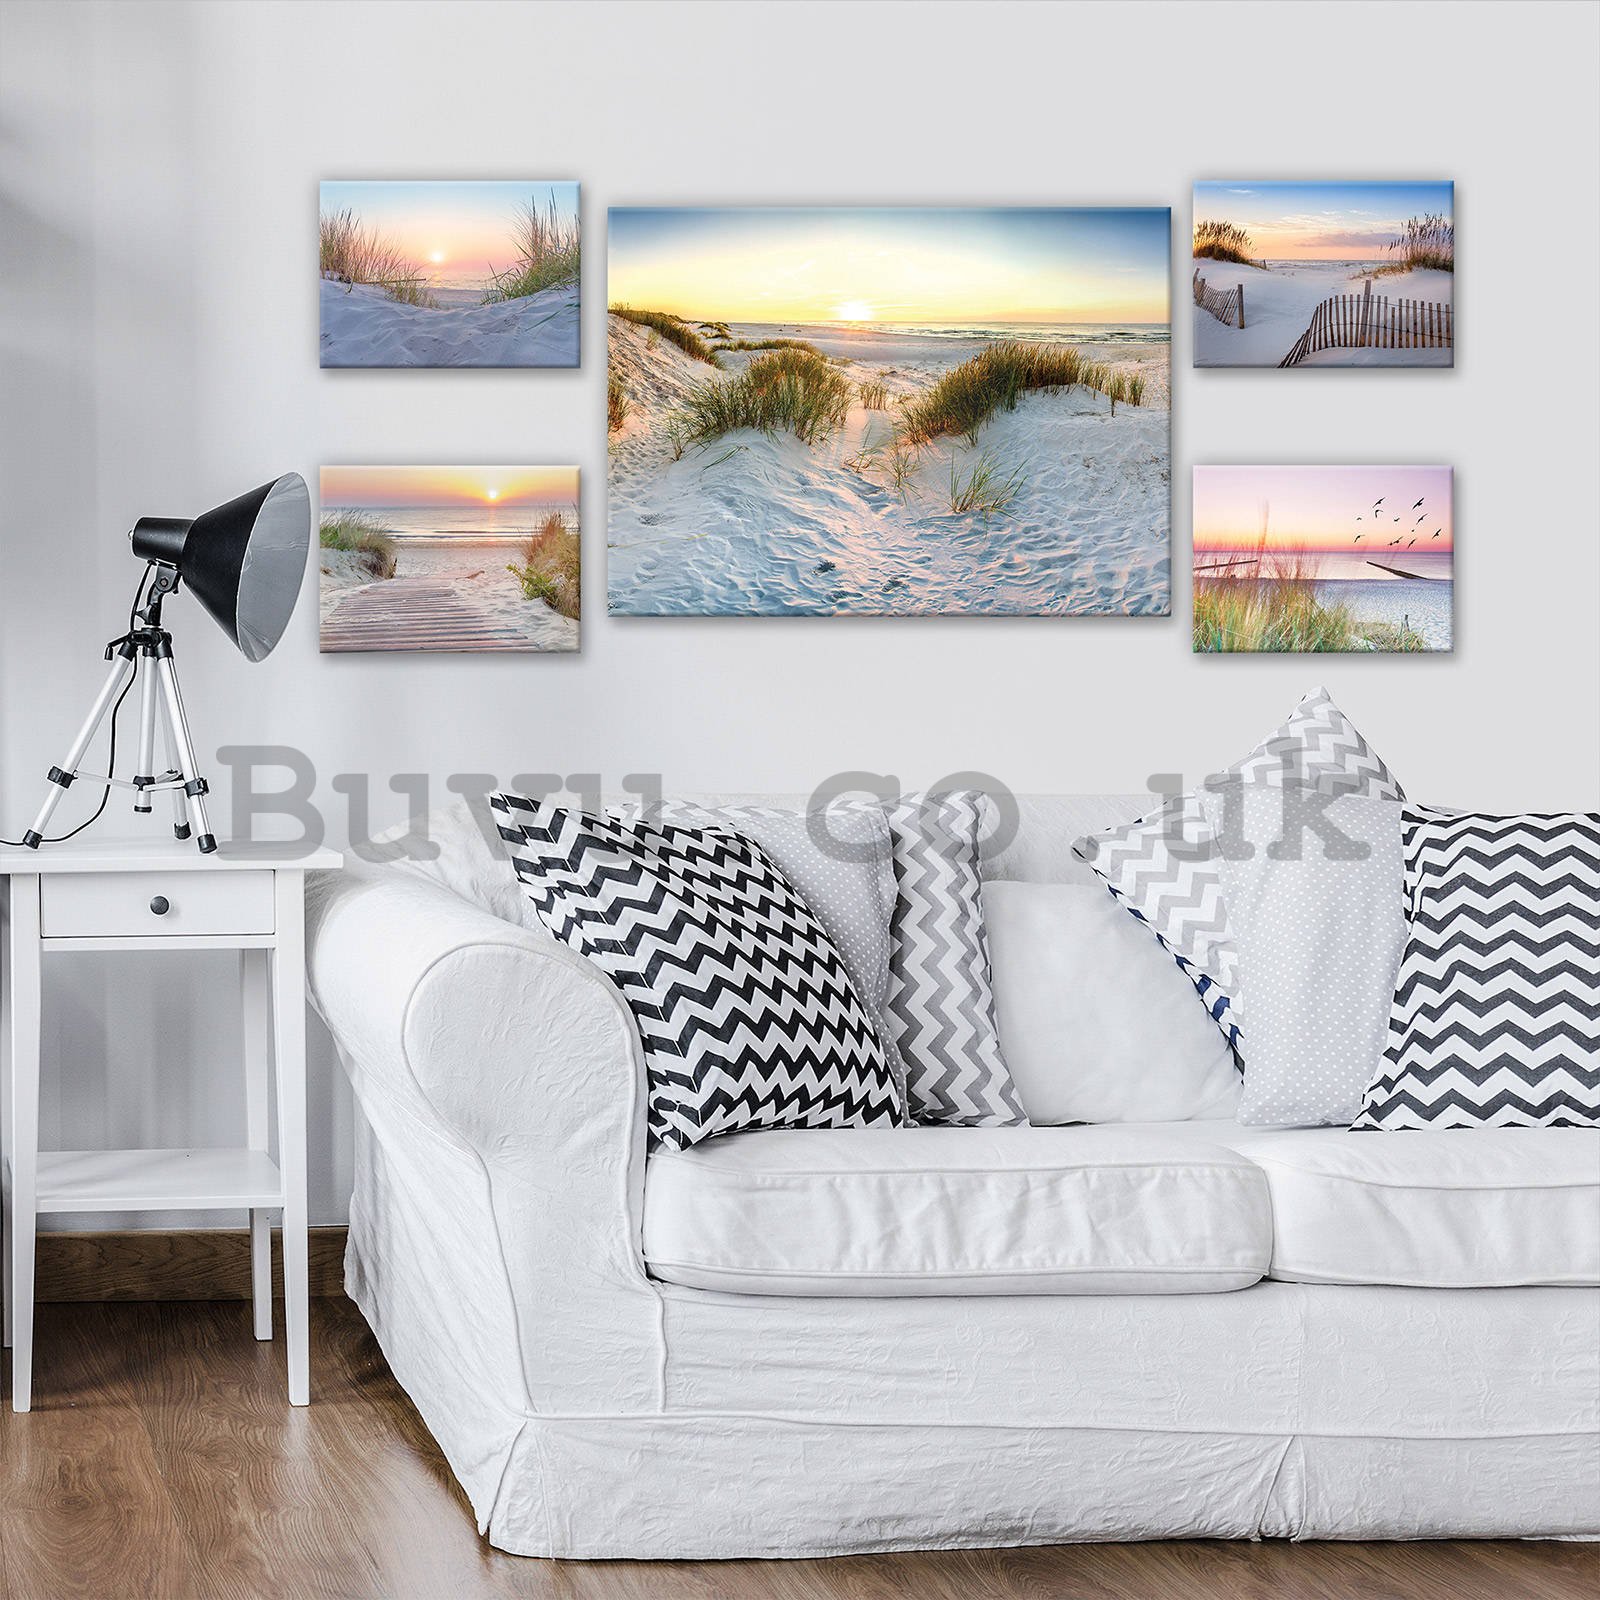 Painting on canvas: Sand dunes - set 1pc 70x50 cm and 4pc 32,4x22,8 cm